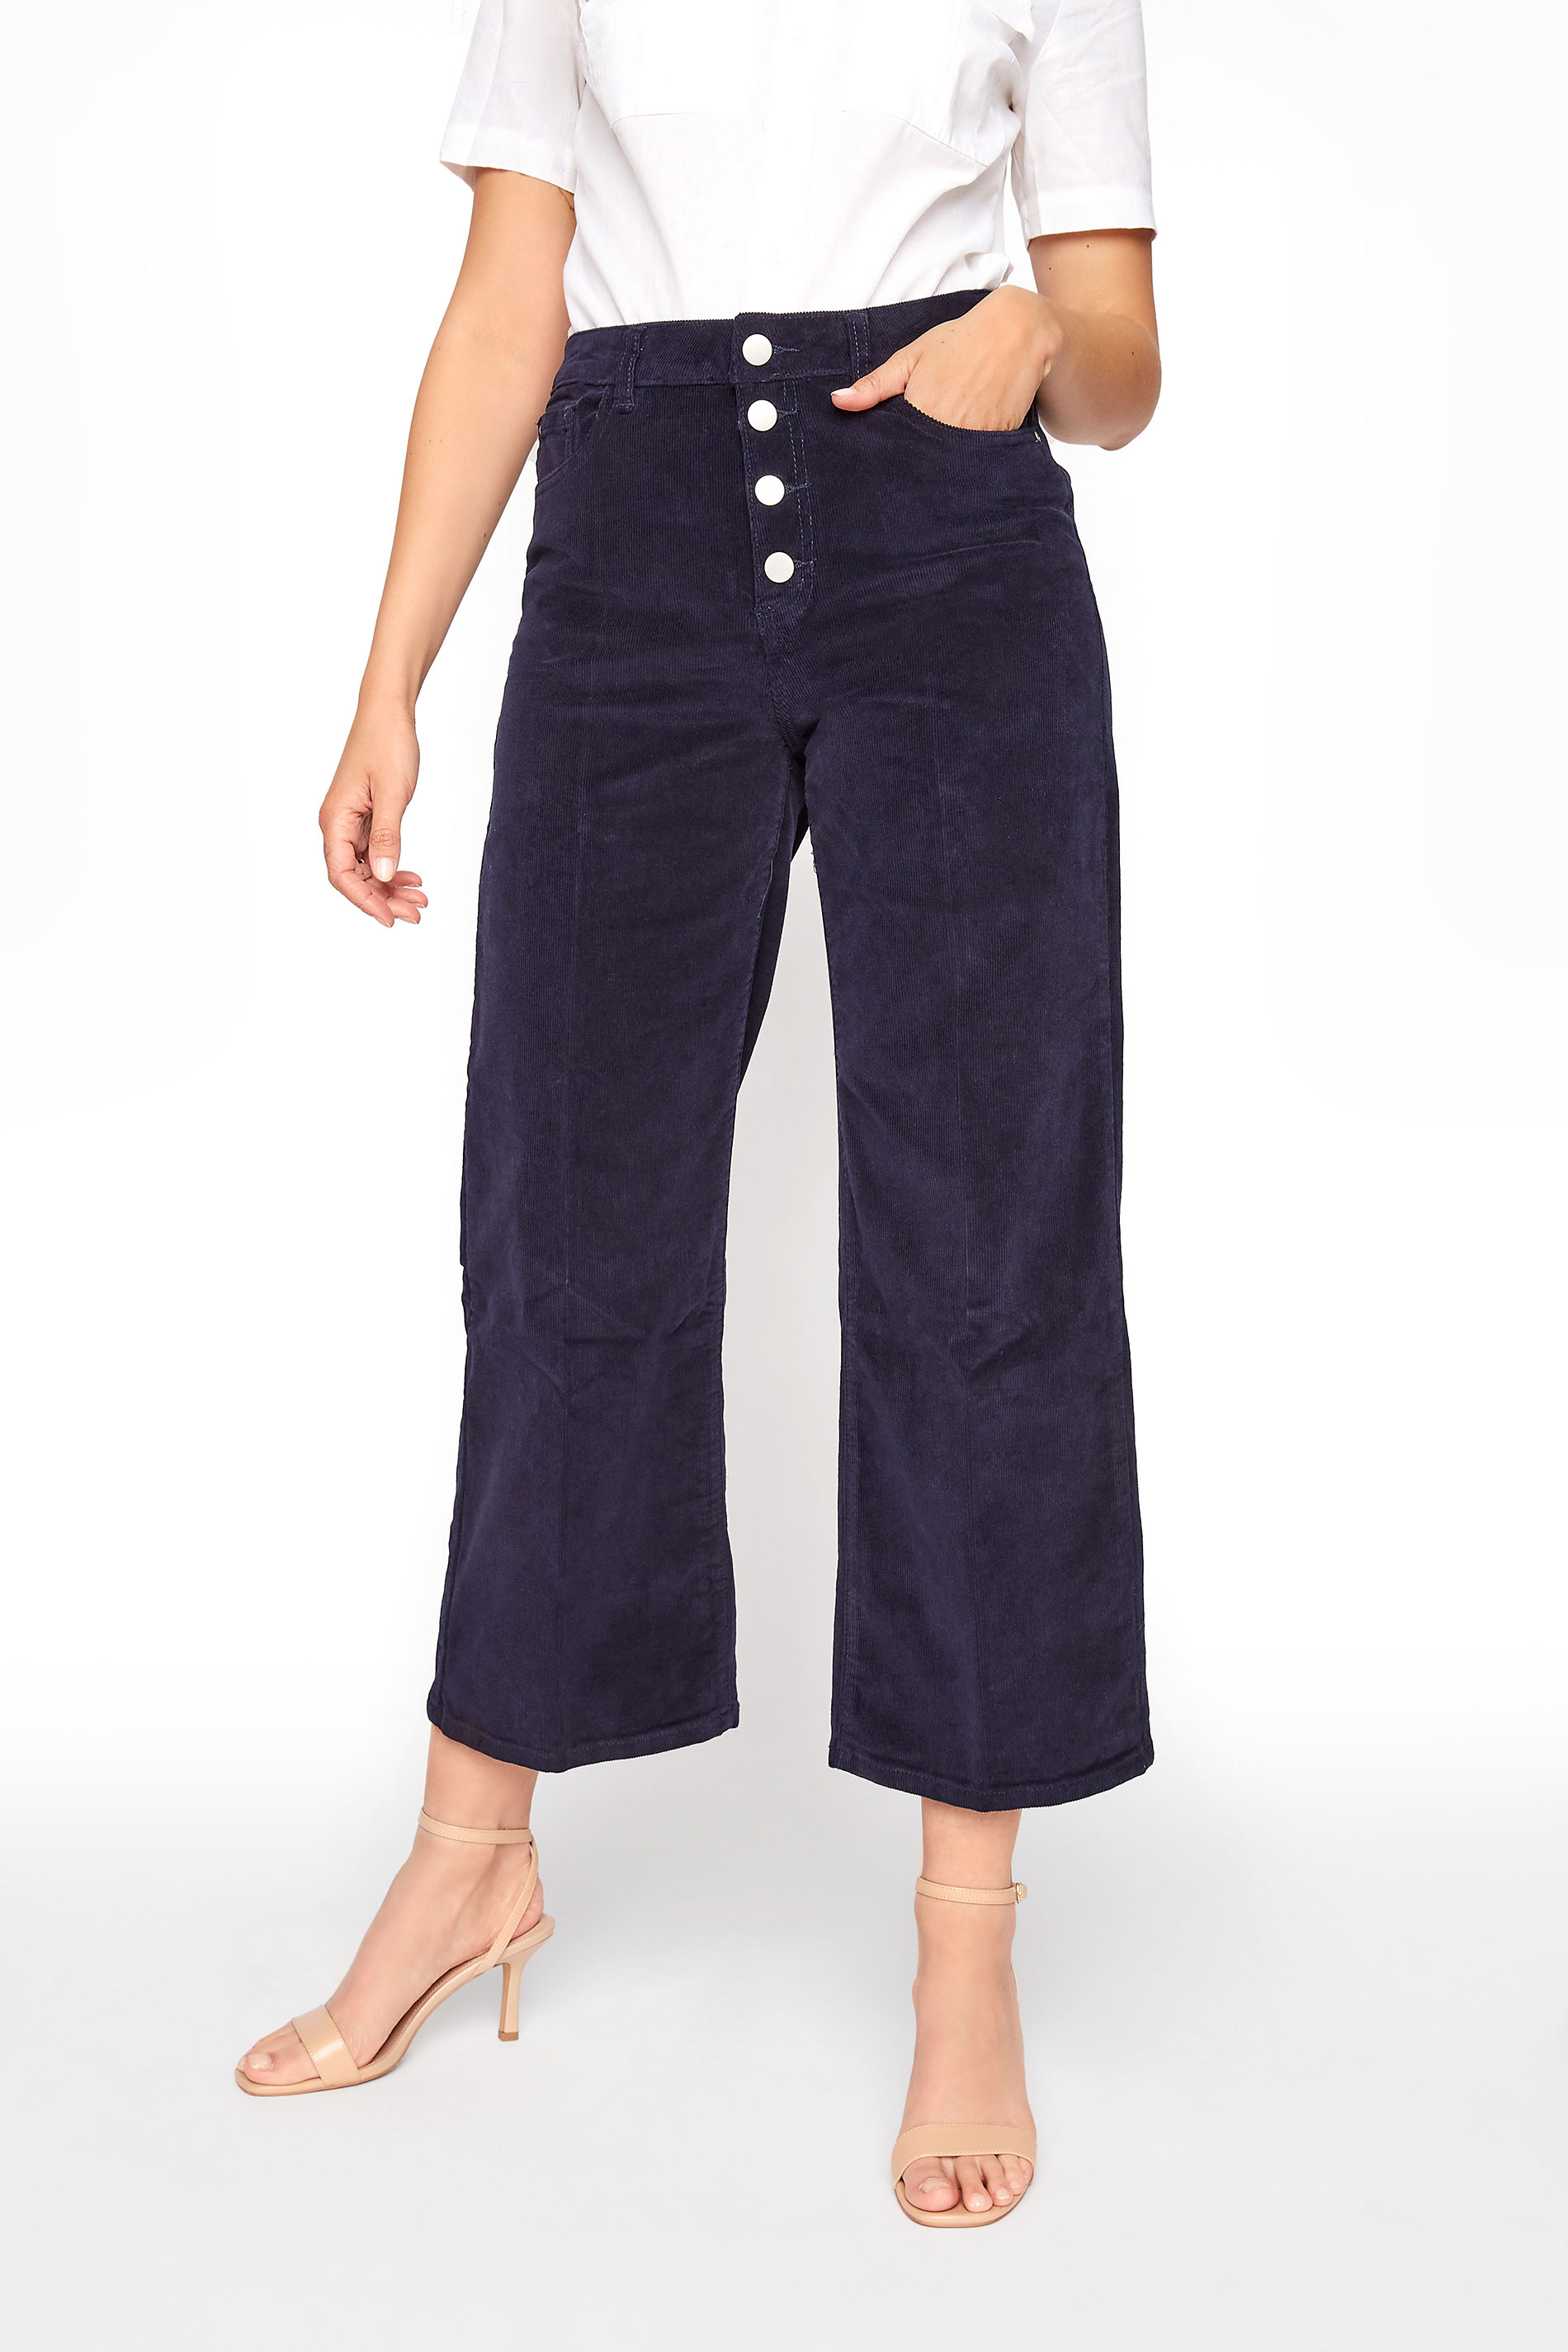 Navy Button Fly Cord Culotte Long Tall Sally